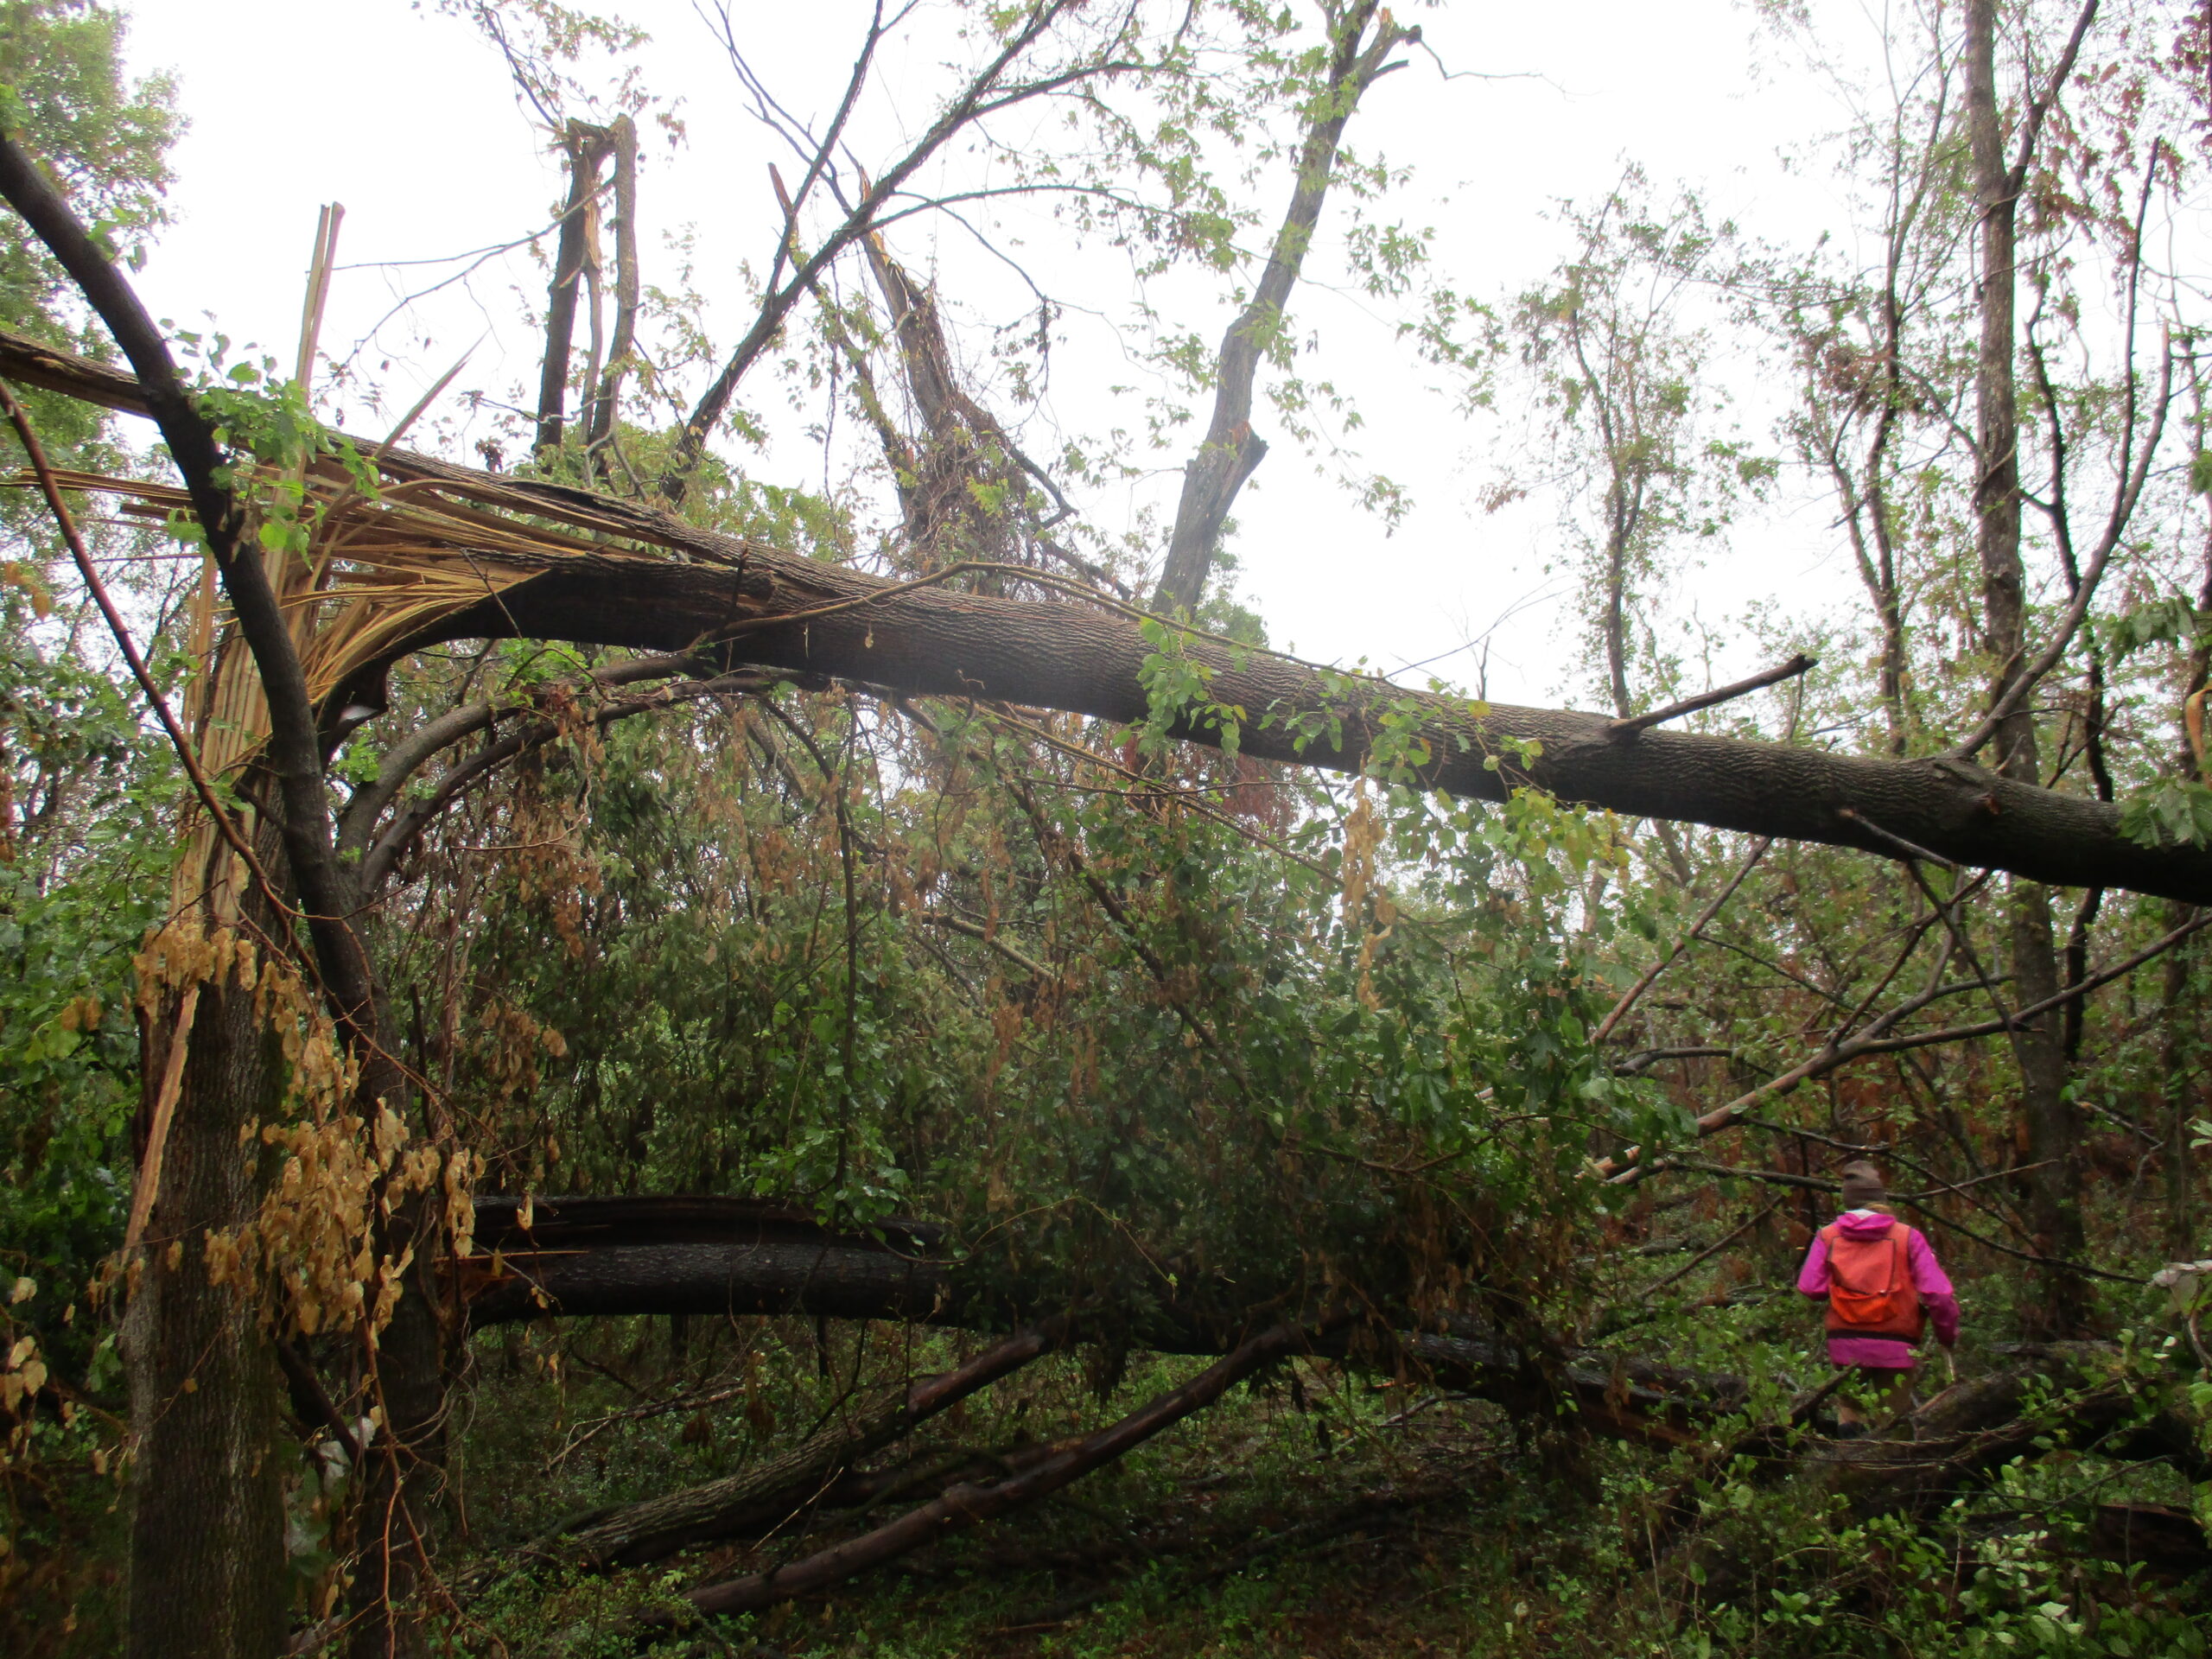 A downed tree after the storm